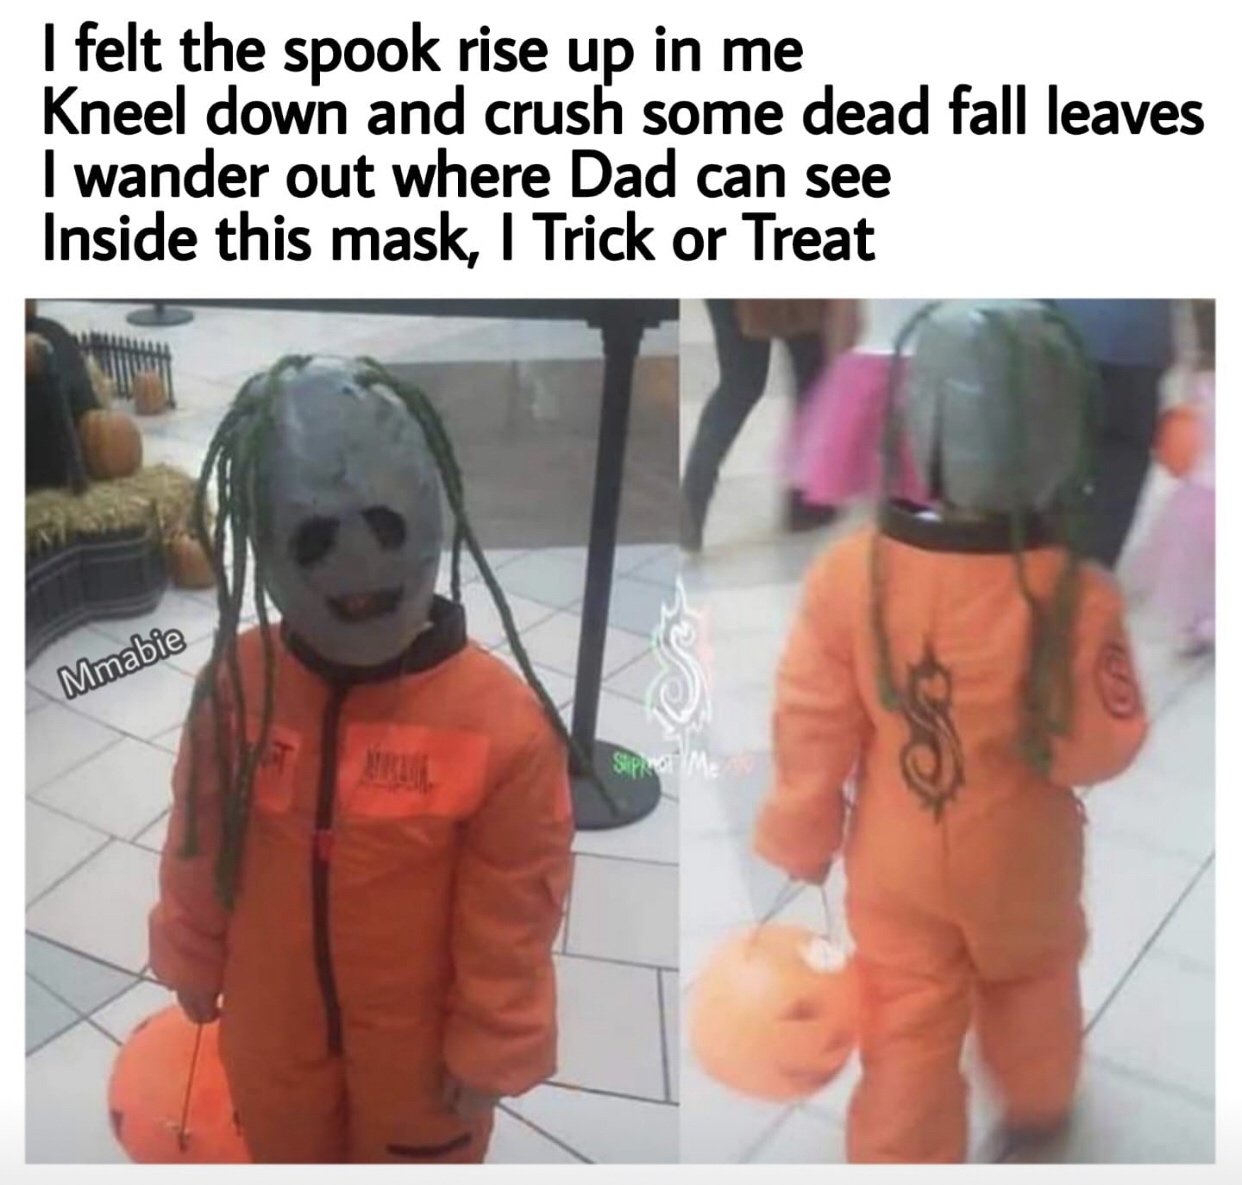 photo caption - I felt the spook rise up in me Kneel down and crush some dead fall leaves I wander out where Dad can see Inside this mask, I Trick or Treat Mmabie Spot Me